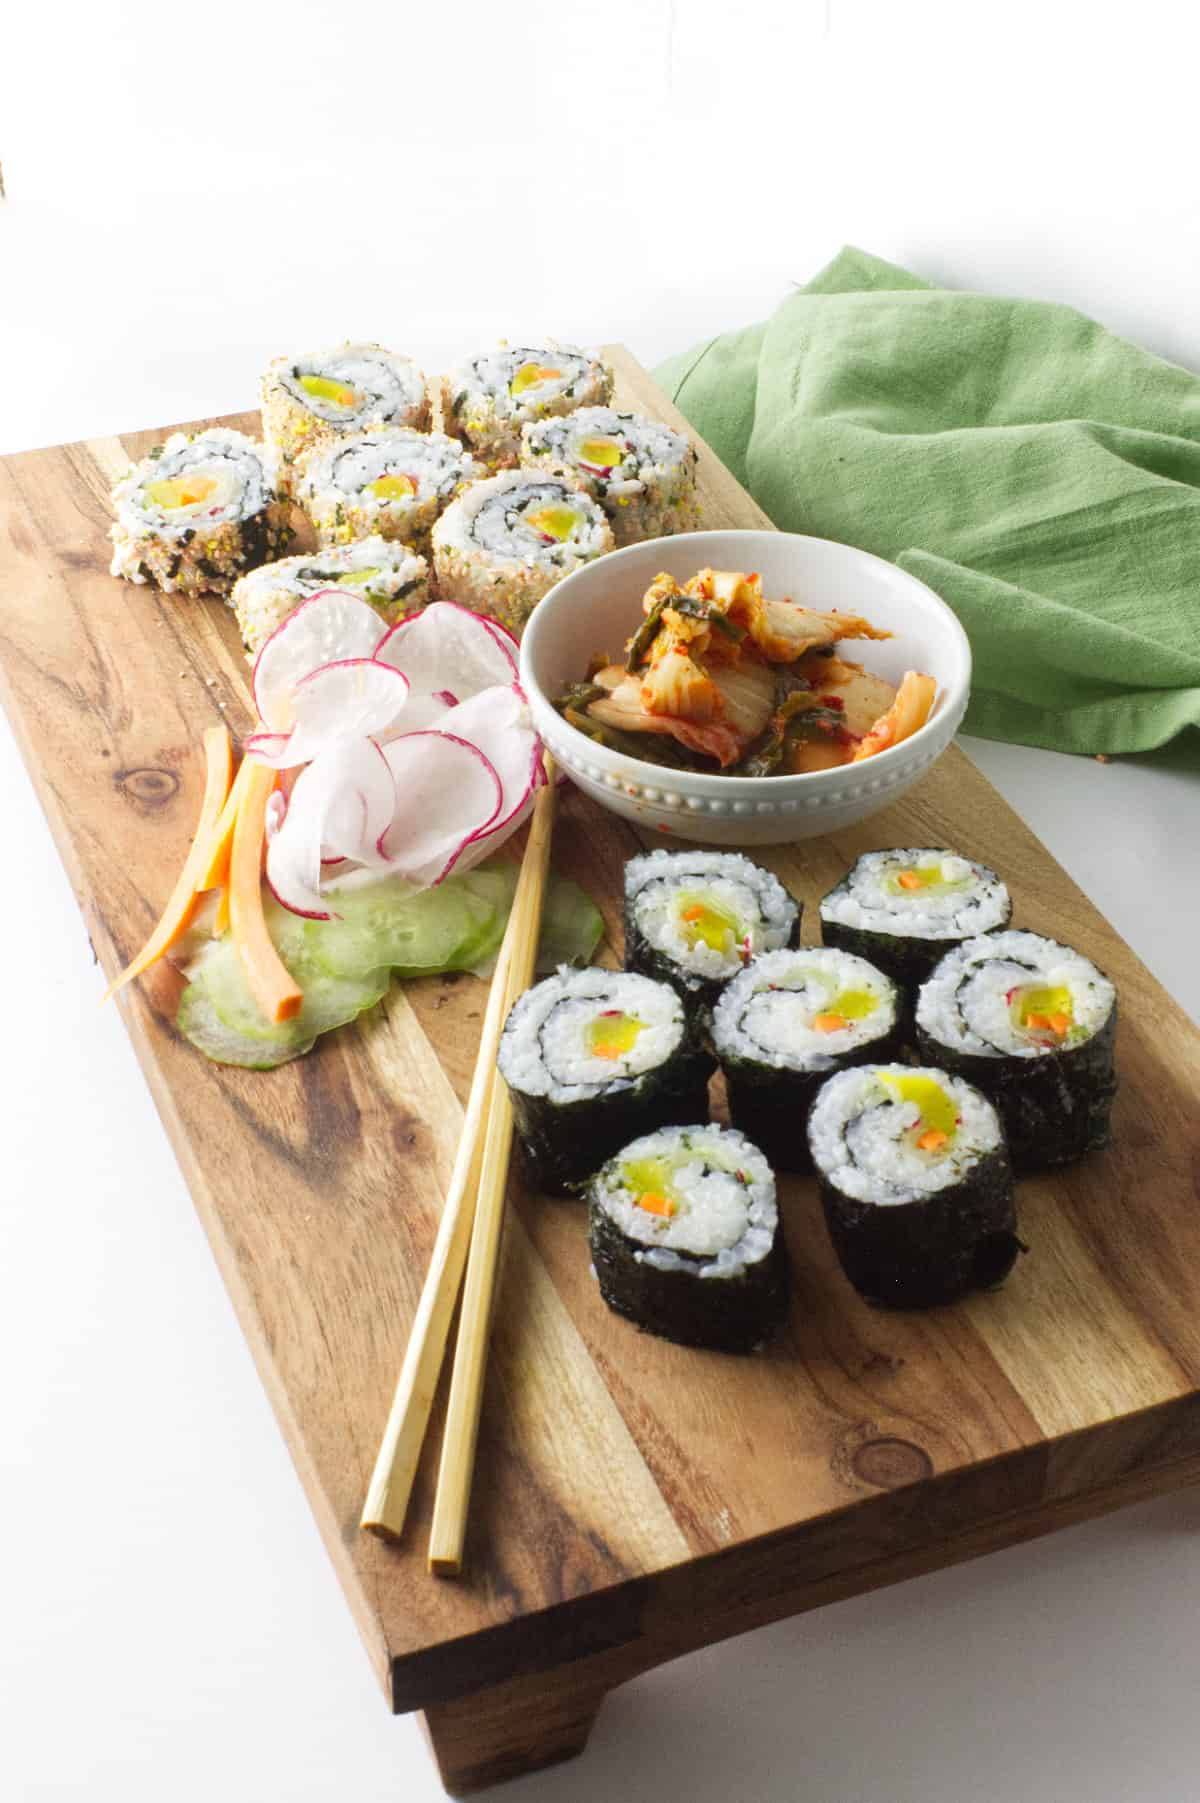 Korean 'Sushi' Rolls on a wood platter with chop sticks and kimchi.